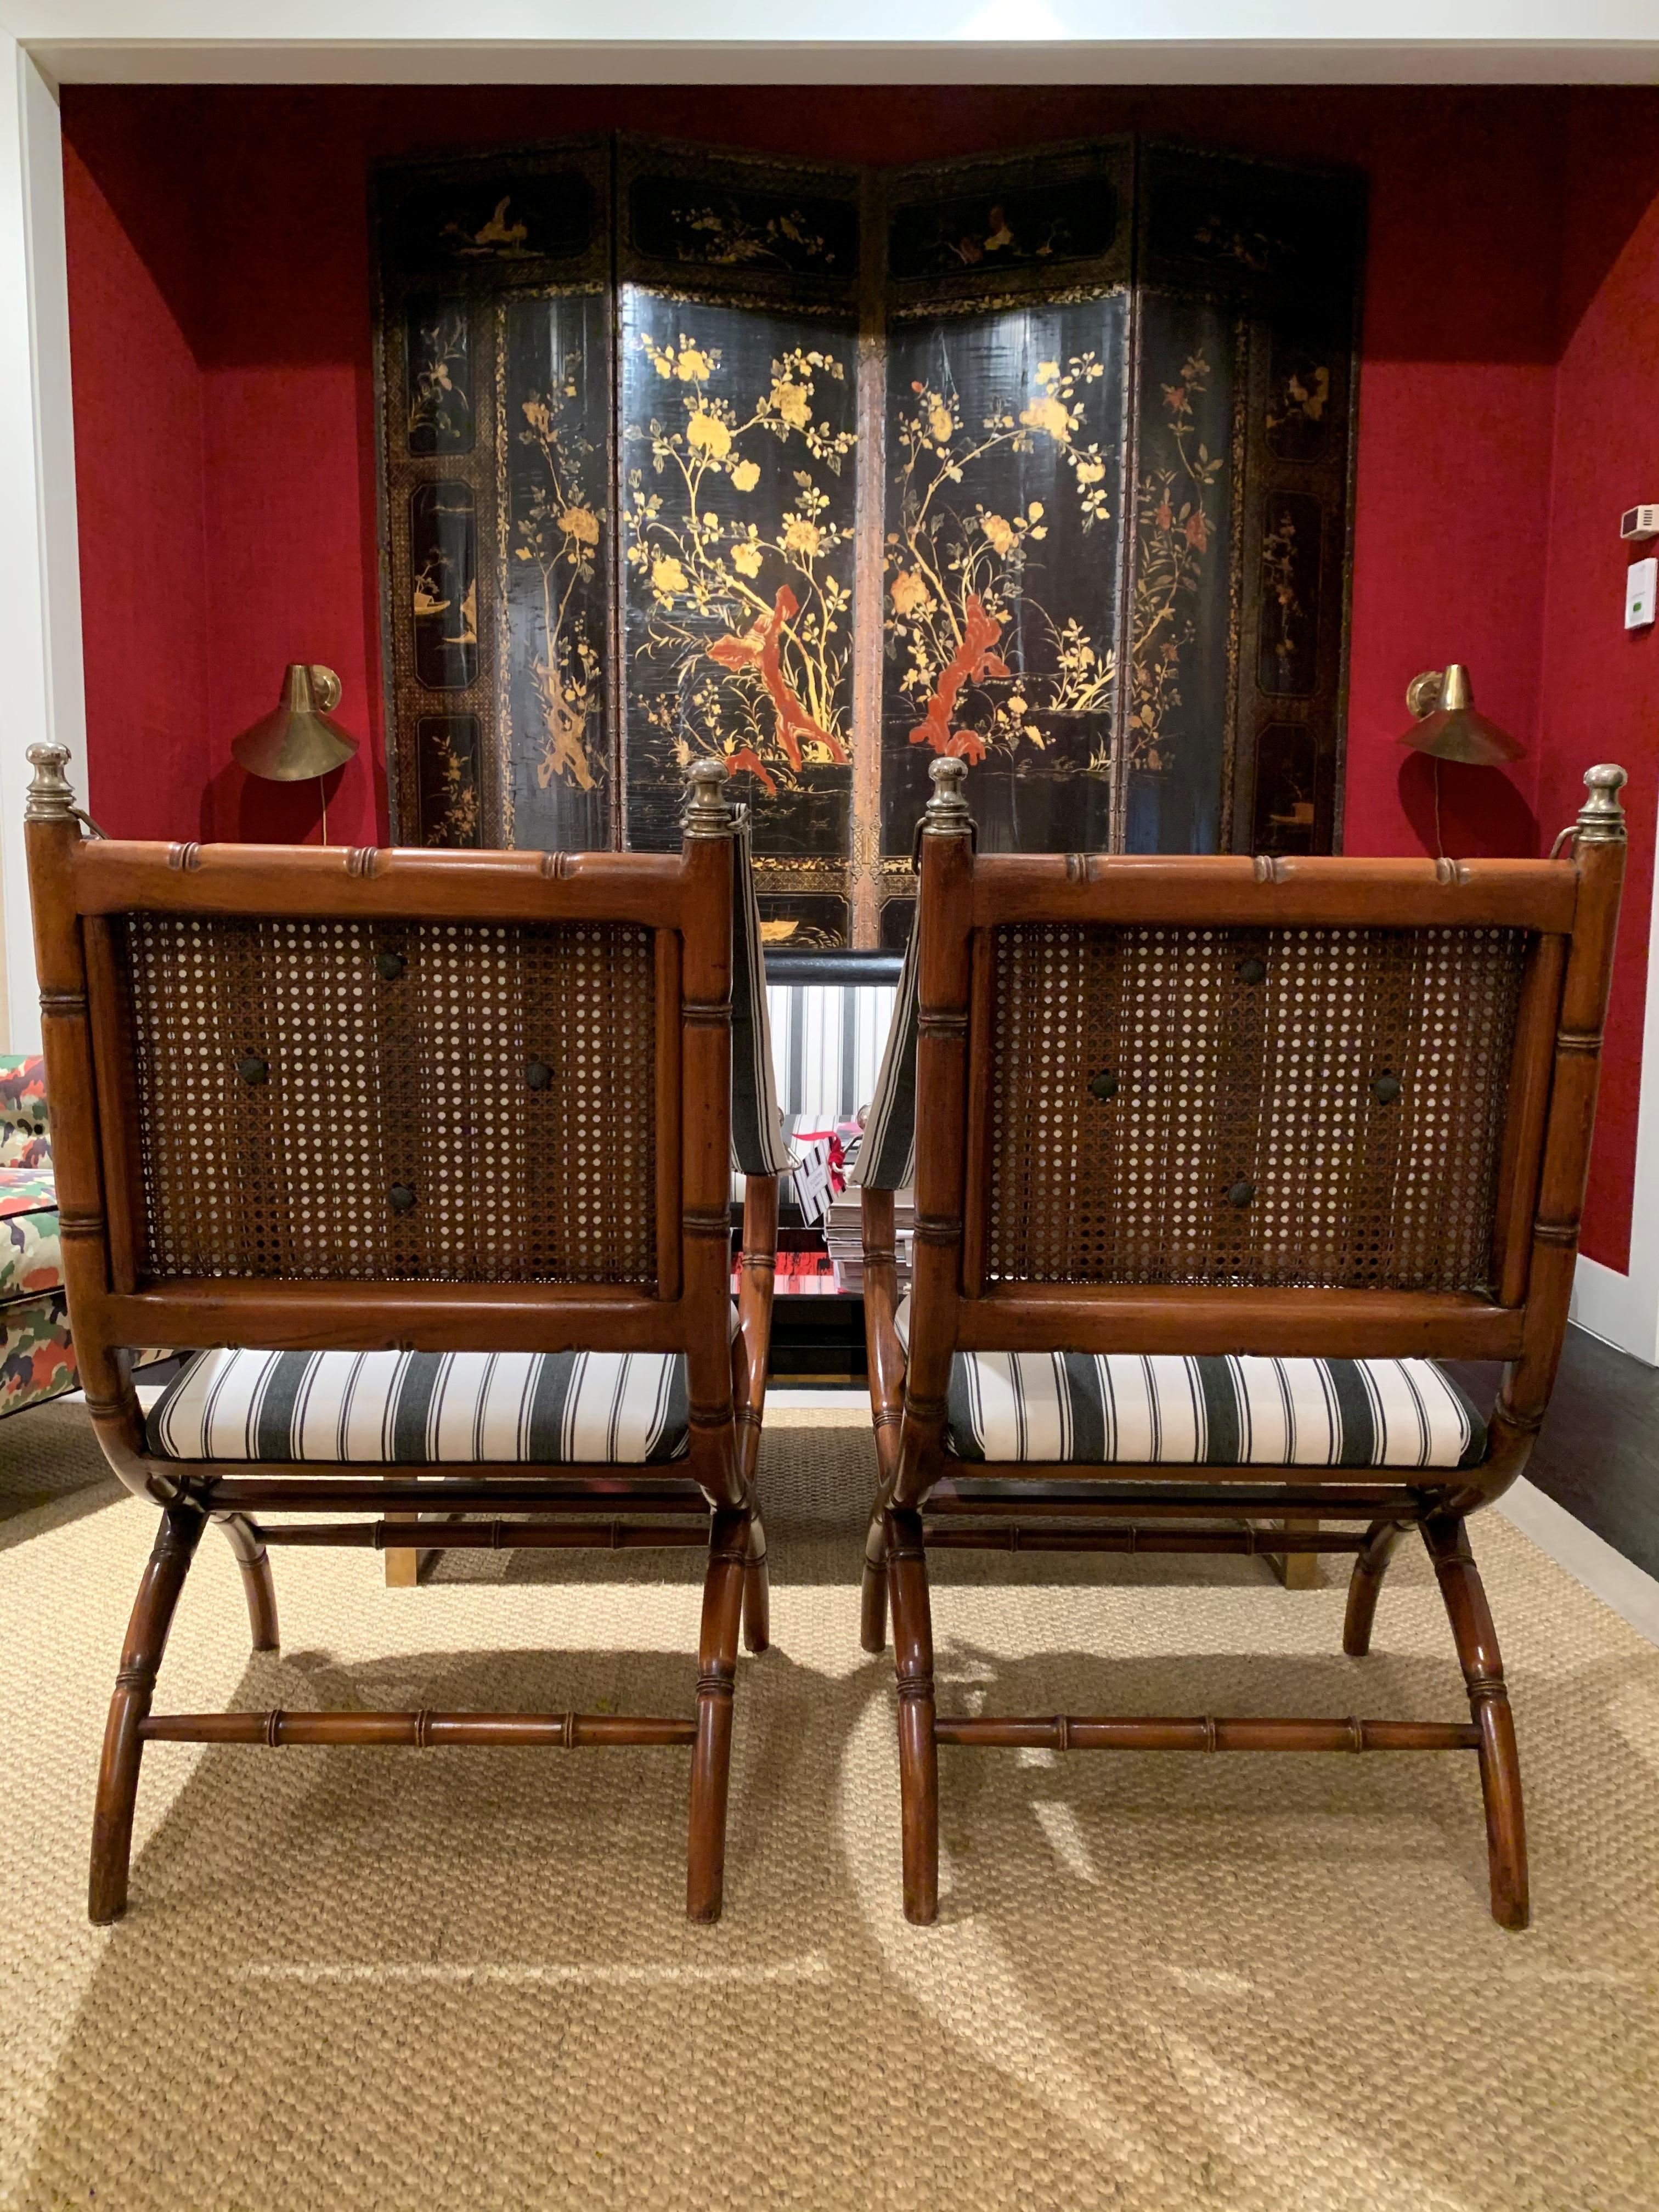 Pair of Faux Bamboo Armchairs on Arched Legs, attributed to Maison Jansen  1